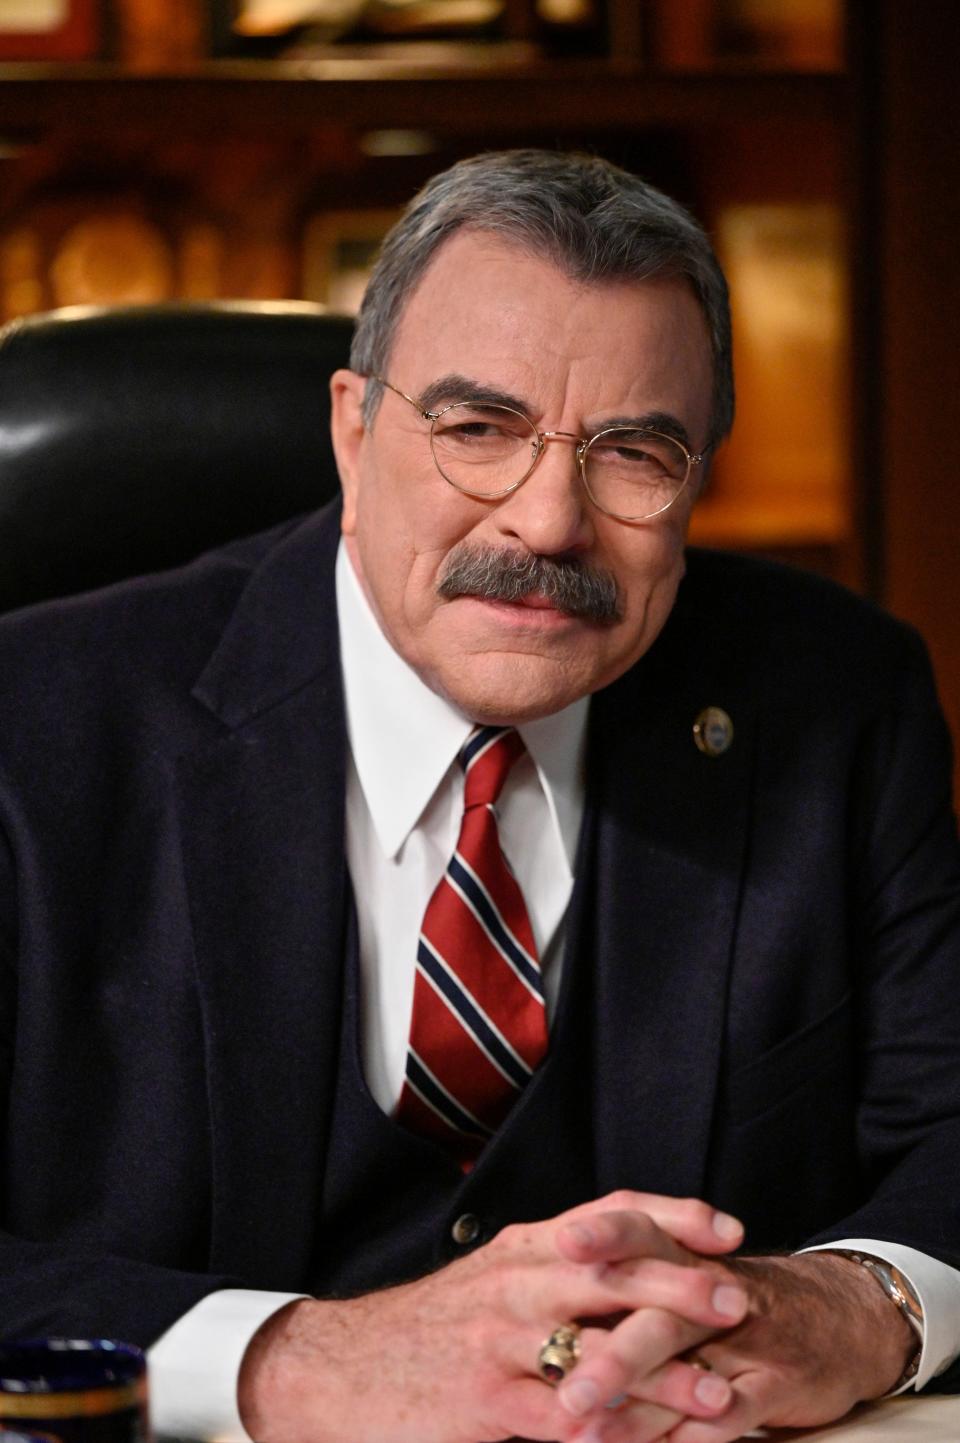 Tom Selleck stars as Frank Reagan in "Blue Bloods" which begins its 14th, and final season, on CBS.